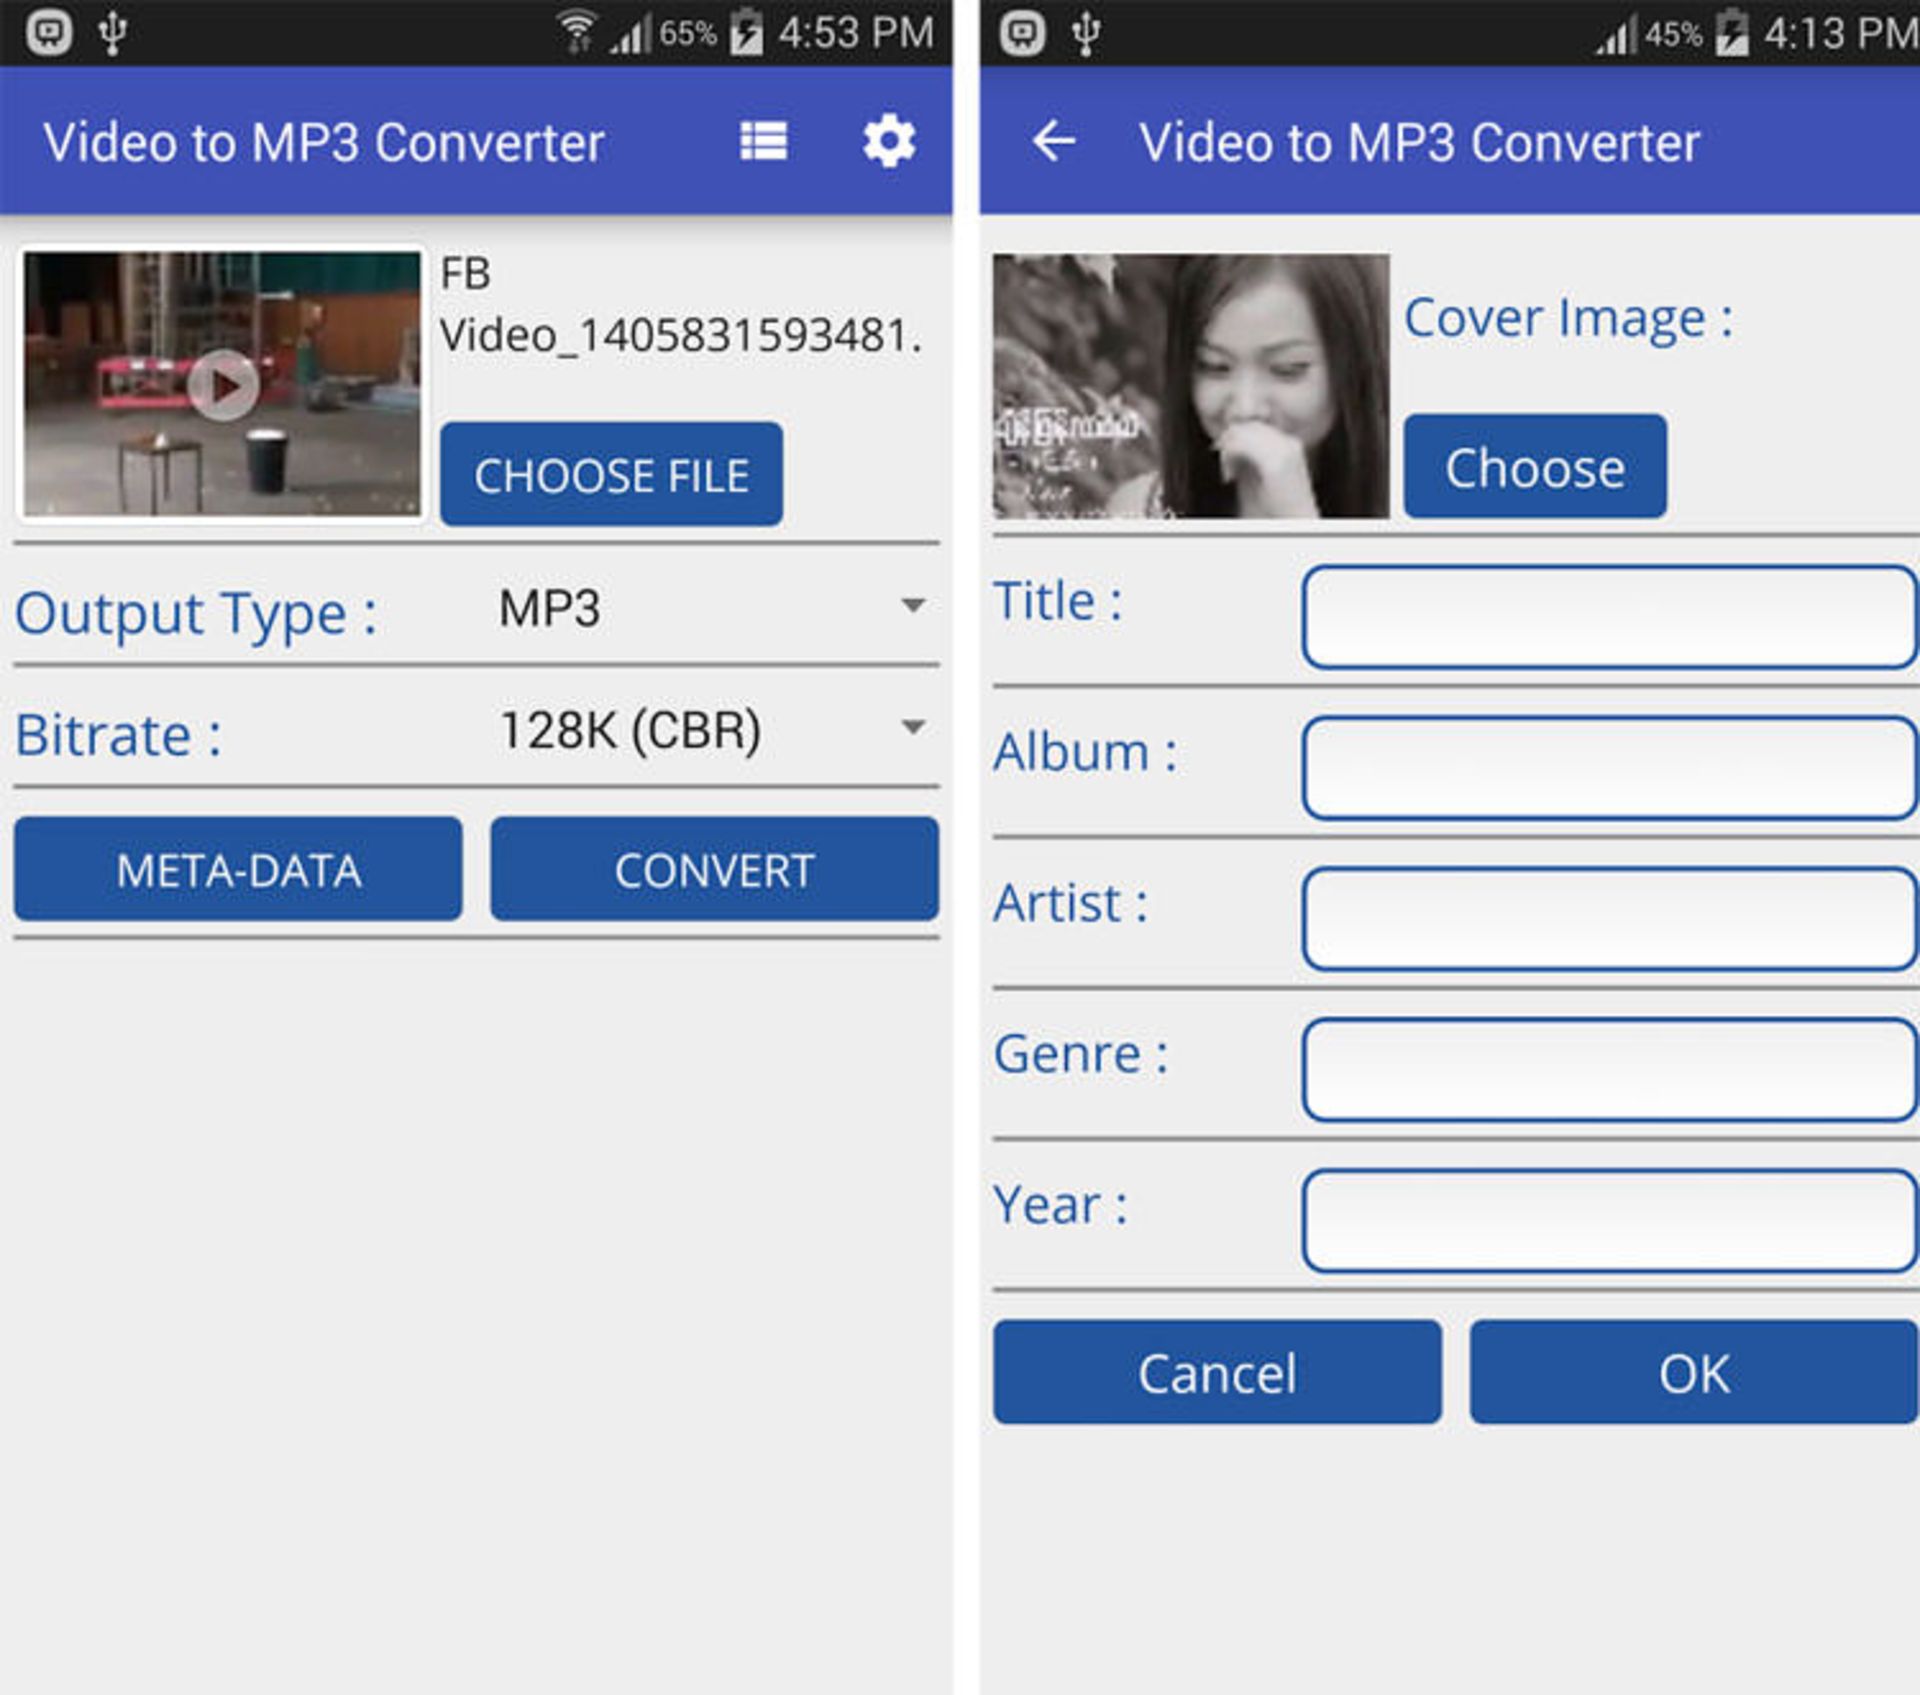 Video to MP3 Converter2